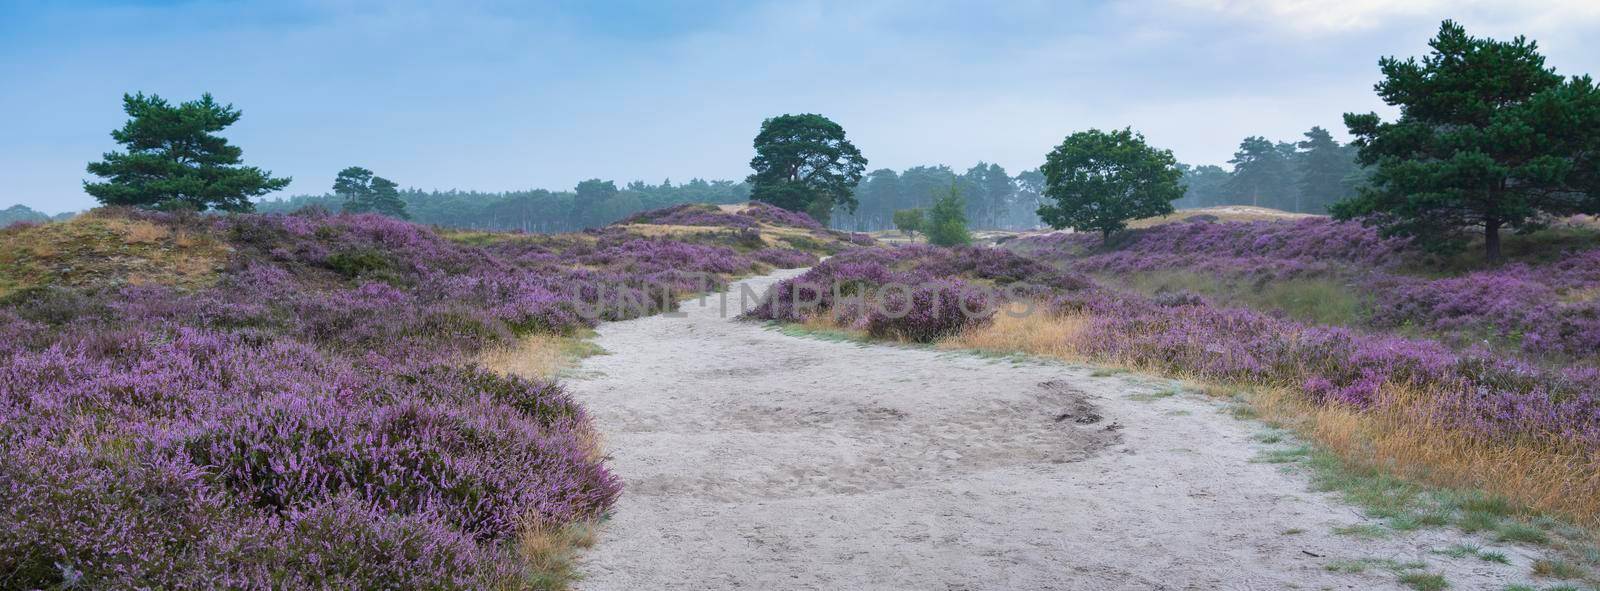 colorful purple heather and pine tree on heath near zeist in the netherlands by ahavelaar